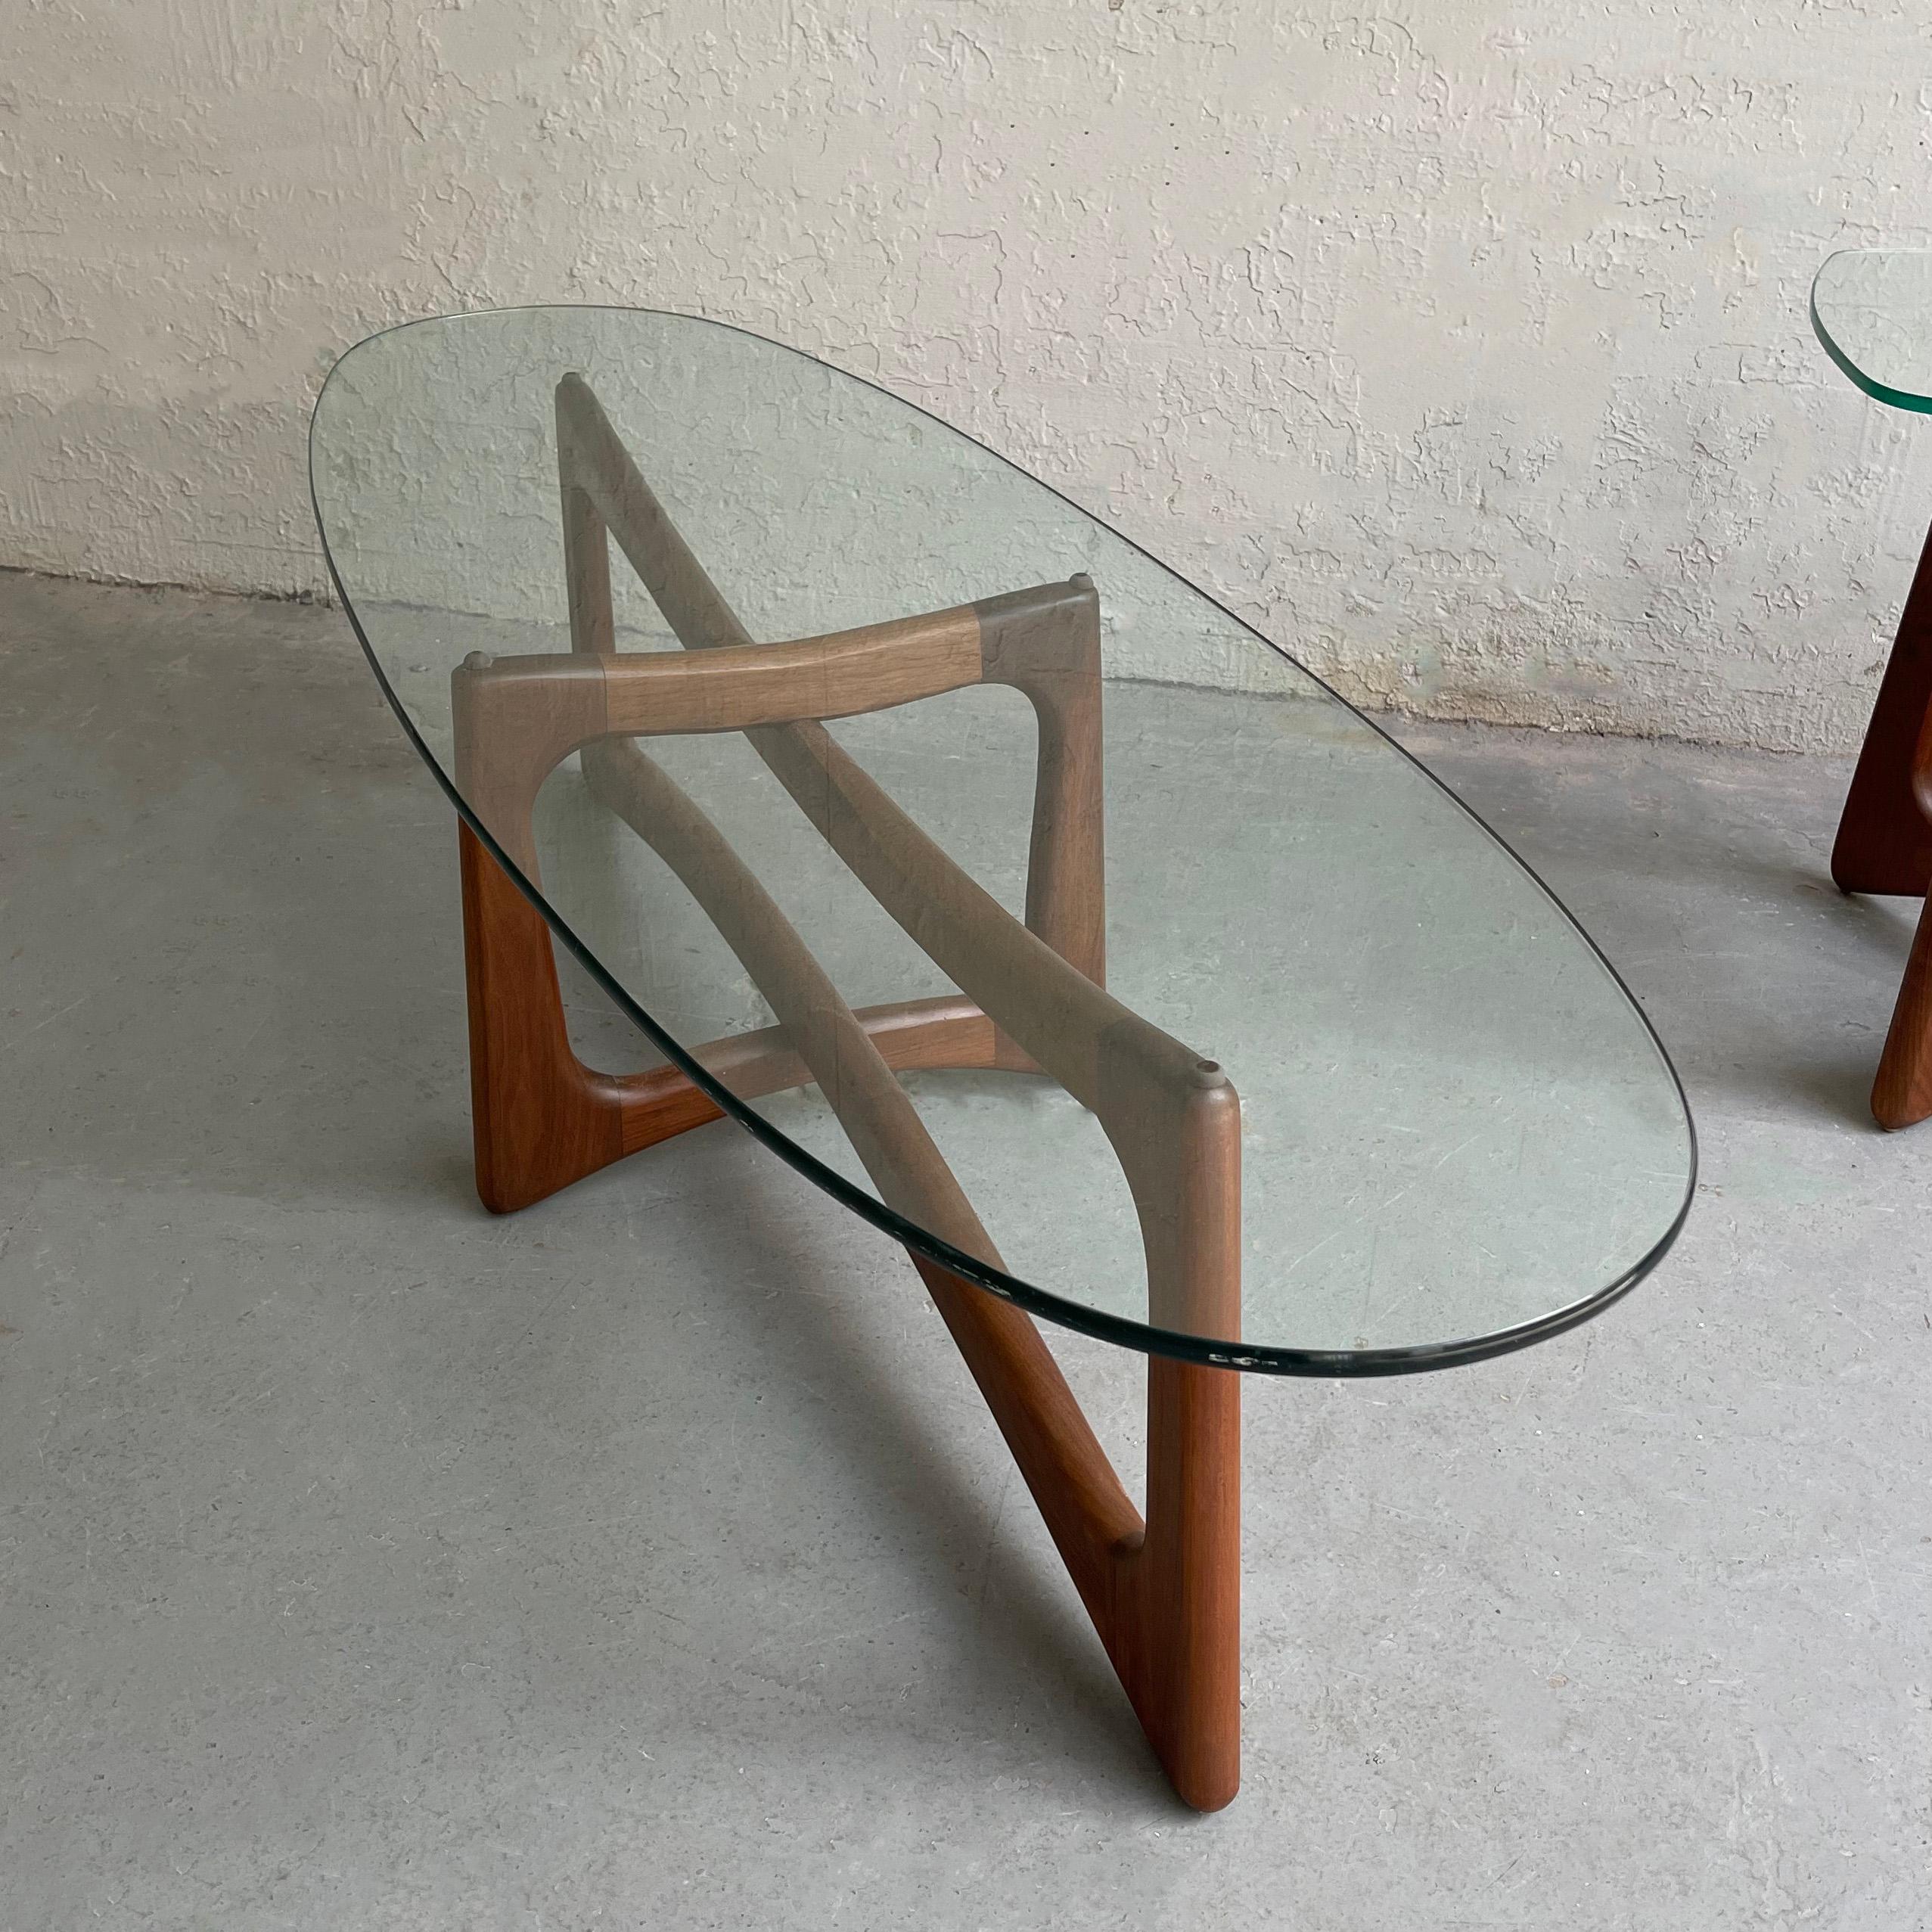 Mid-Century Modern coffee table by Adrian Pearsall for Craft Associates features an intersecting, sculptural 